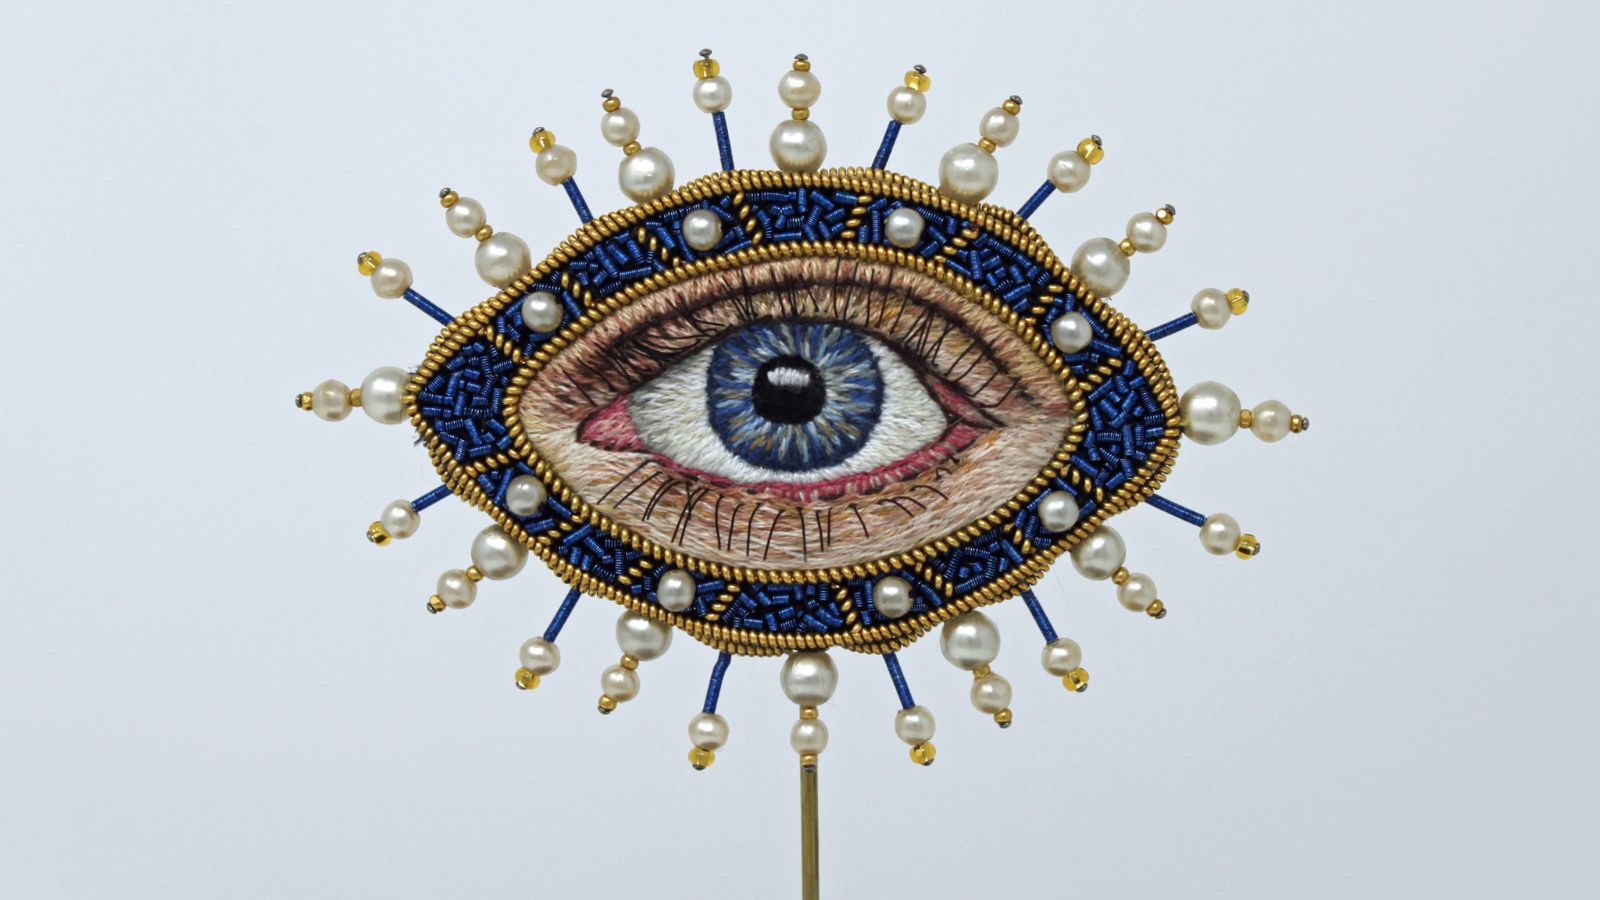 A highly detailed embroidered blue eye with gold spokes sticking out all around it by artist Tzipporah Johnston